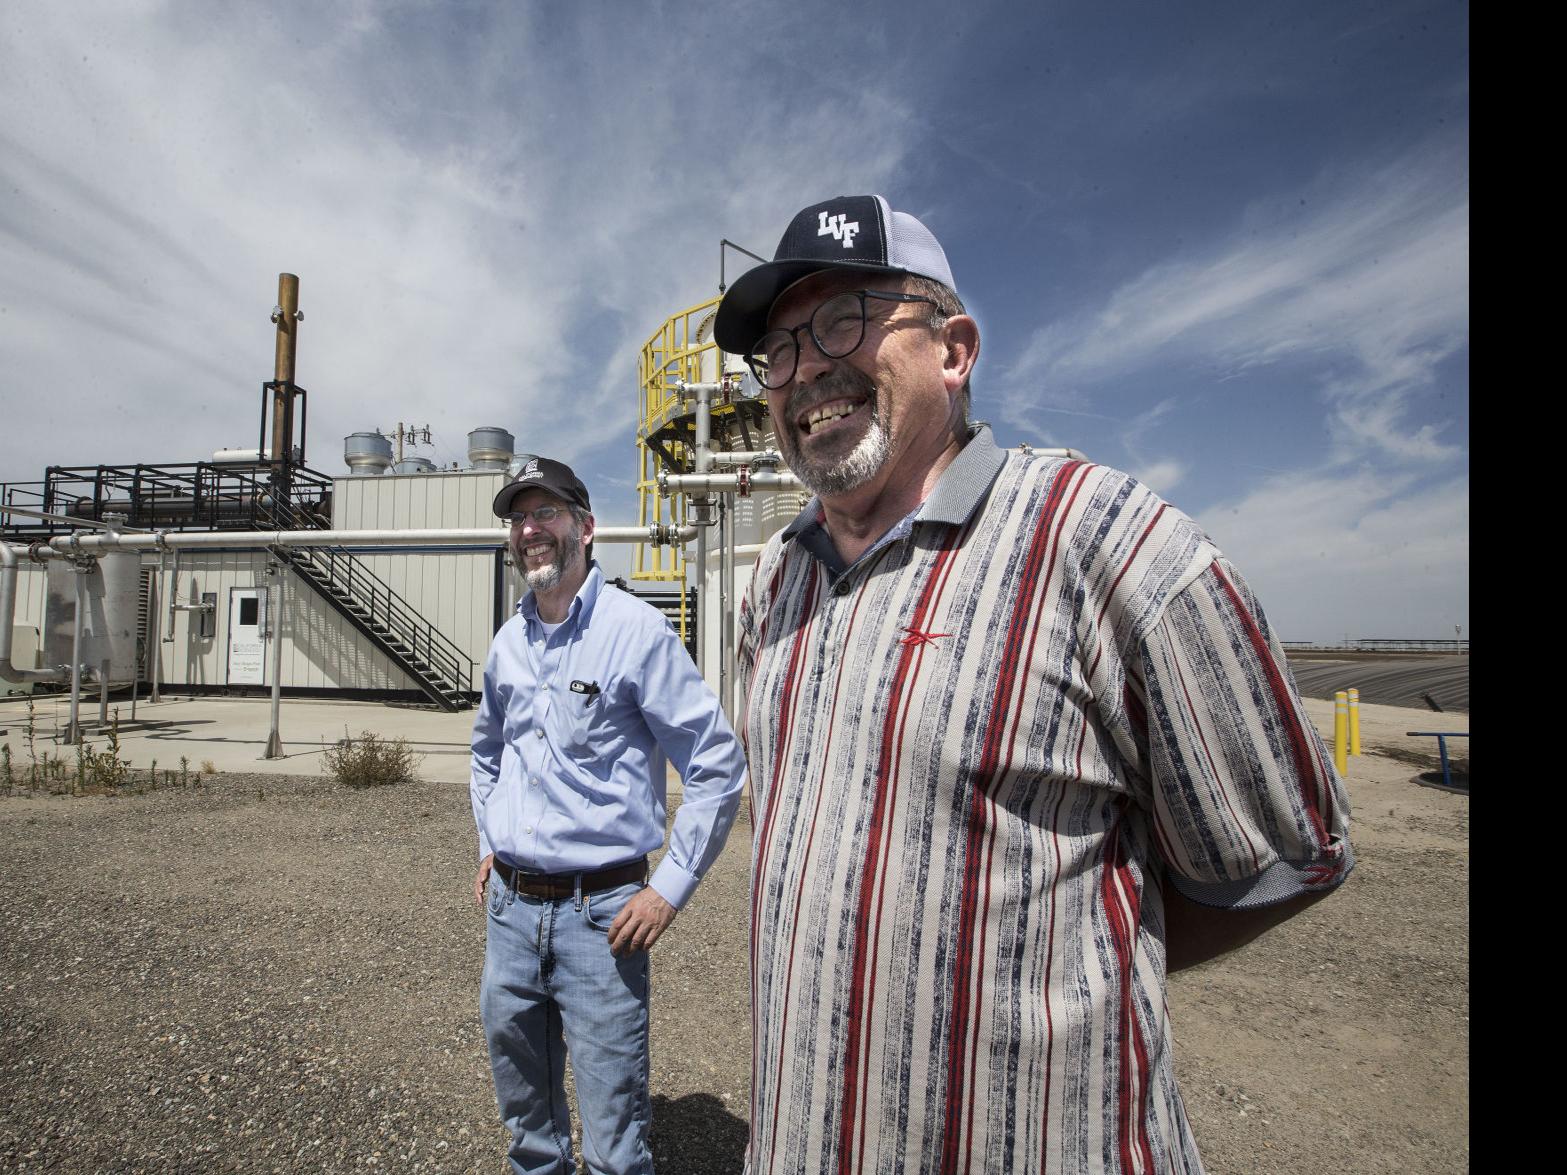 chevron partners with biomethane developer to harvest market gas from local dairy manure news bakersfield com local dairy manure